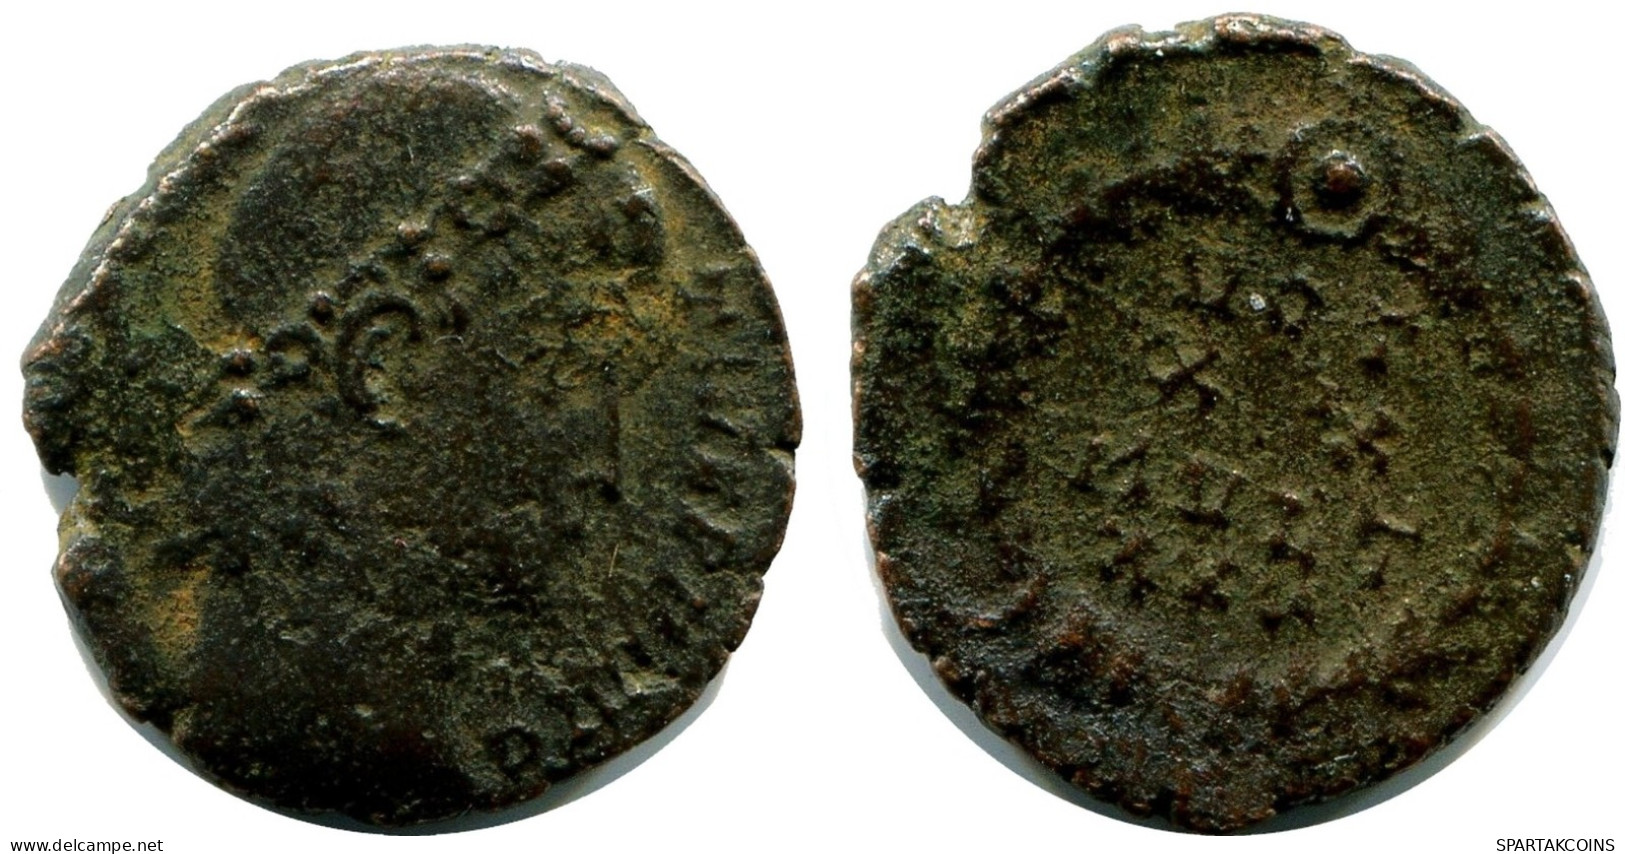 CONSTANTIUS II MINTED IN ANTIOCH FROM THE ROYAL ONTARIO MUSEUM #ANC11269.14.D.A - Der Christlischen Kaiser (307 / 363)